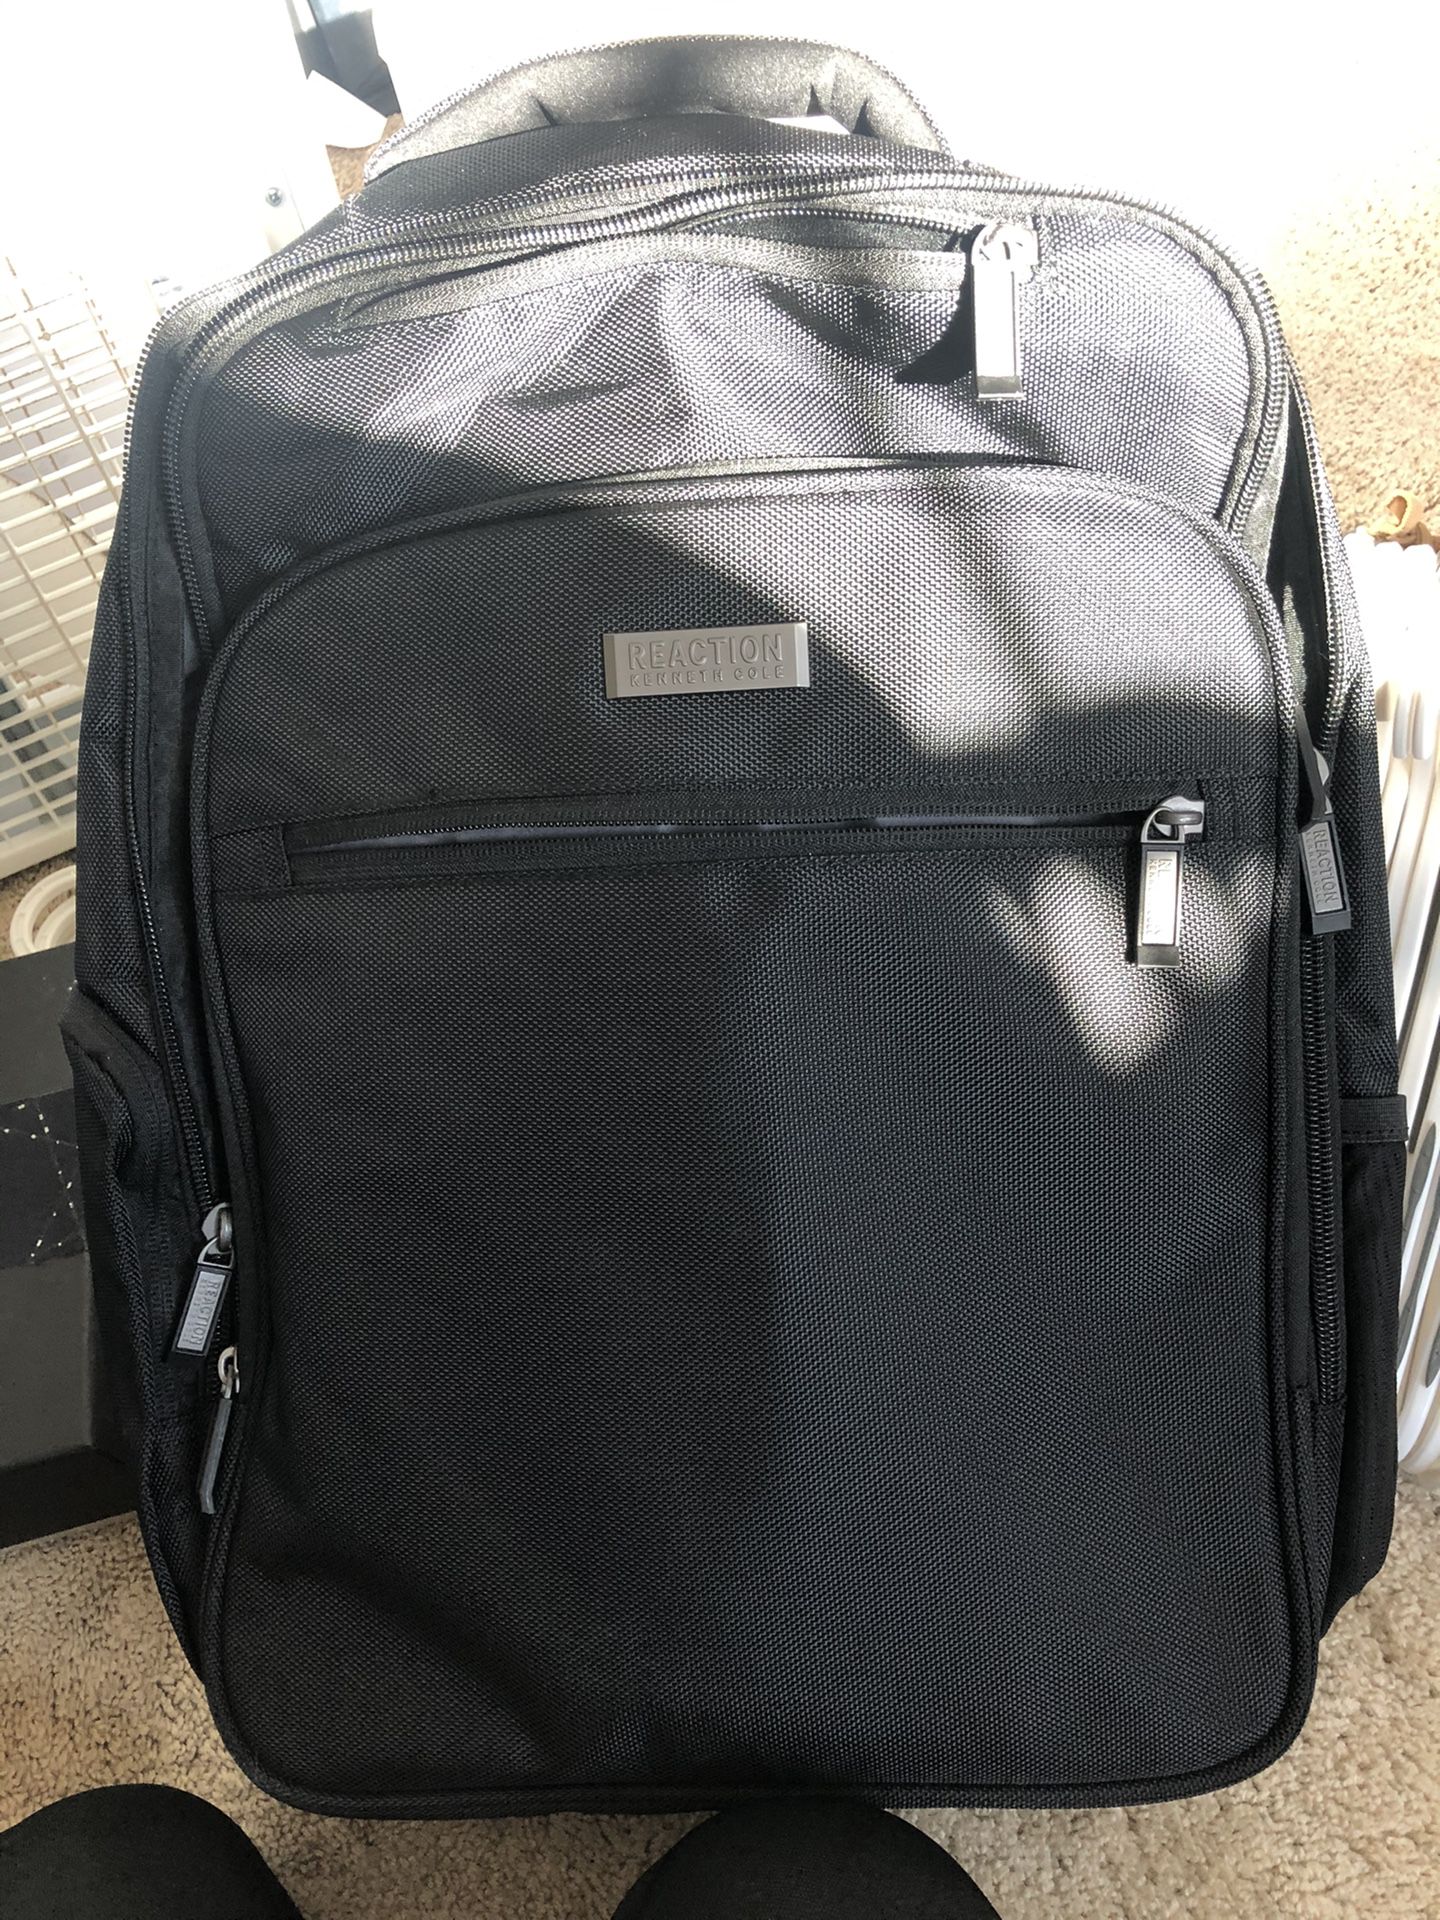 Reaction Kenneth Cole laptop backpack